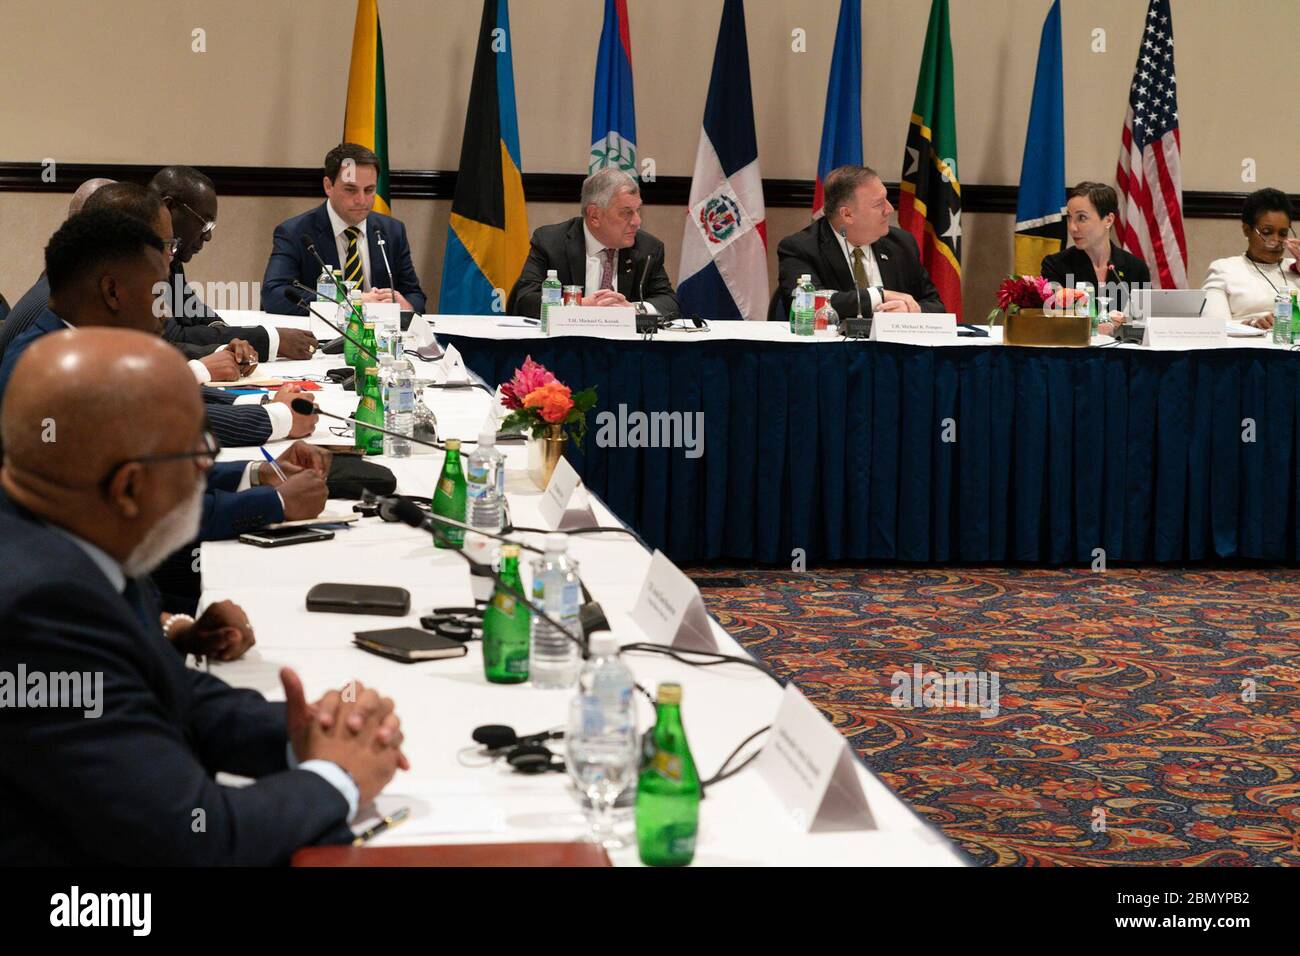 Secretary Pompeo Participates in a Roundtable Discussion Secretary of State Michael R.  Pompeo participates in a roundtable discussion with Jamaican Foreign Minister Kamina Johnson Smith, Bahamian Foreign Minister Darren Henfield, Belizean Foreign Minister Wilfred Elrington, Dominican Republic Foreign Minister Miguel Vargas Maldonado, Haitian Foreign Minister Bocchit Edmond, St. Kitts and Nevis Foreign Minister Mark Brantley, and Saint Lucian External Affairs Minister Sarah Flood-Beaubrun, in Kingston, Jamaica  on January 22, 2020. Stock Photo